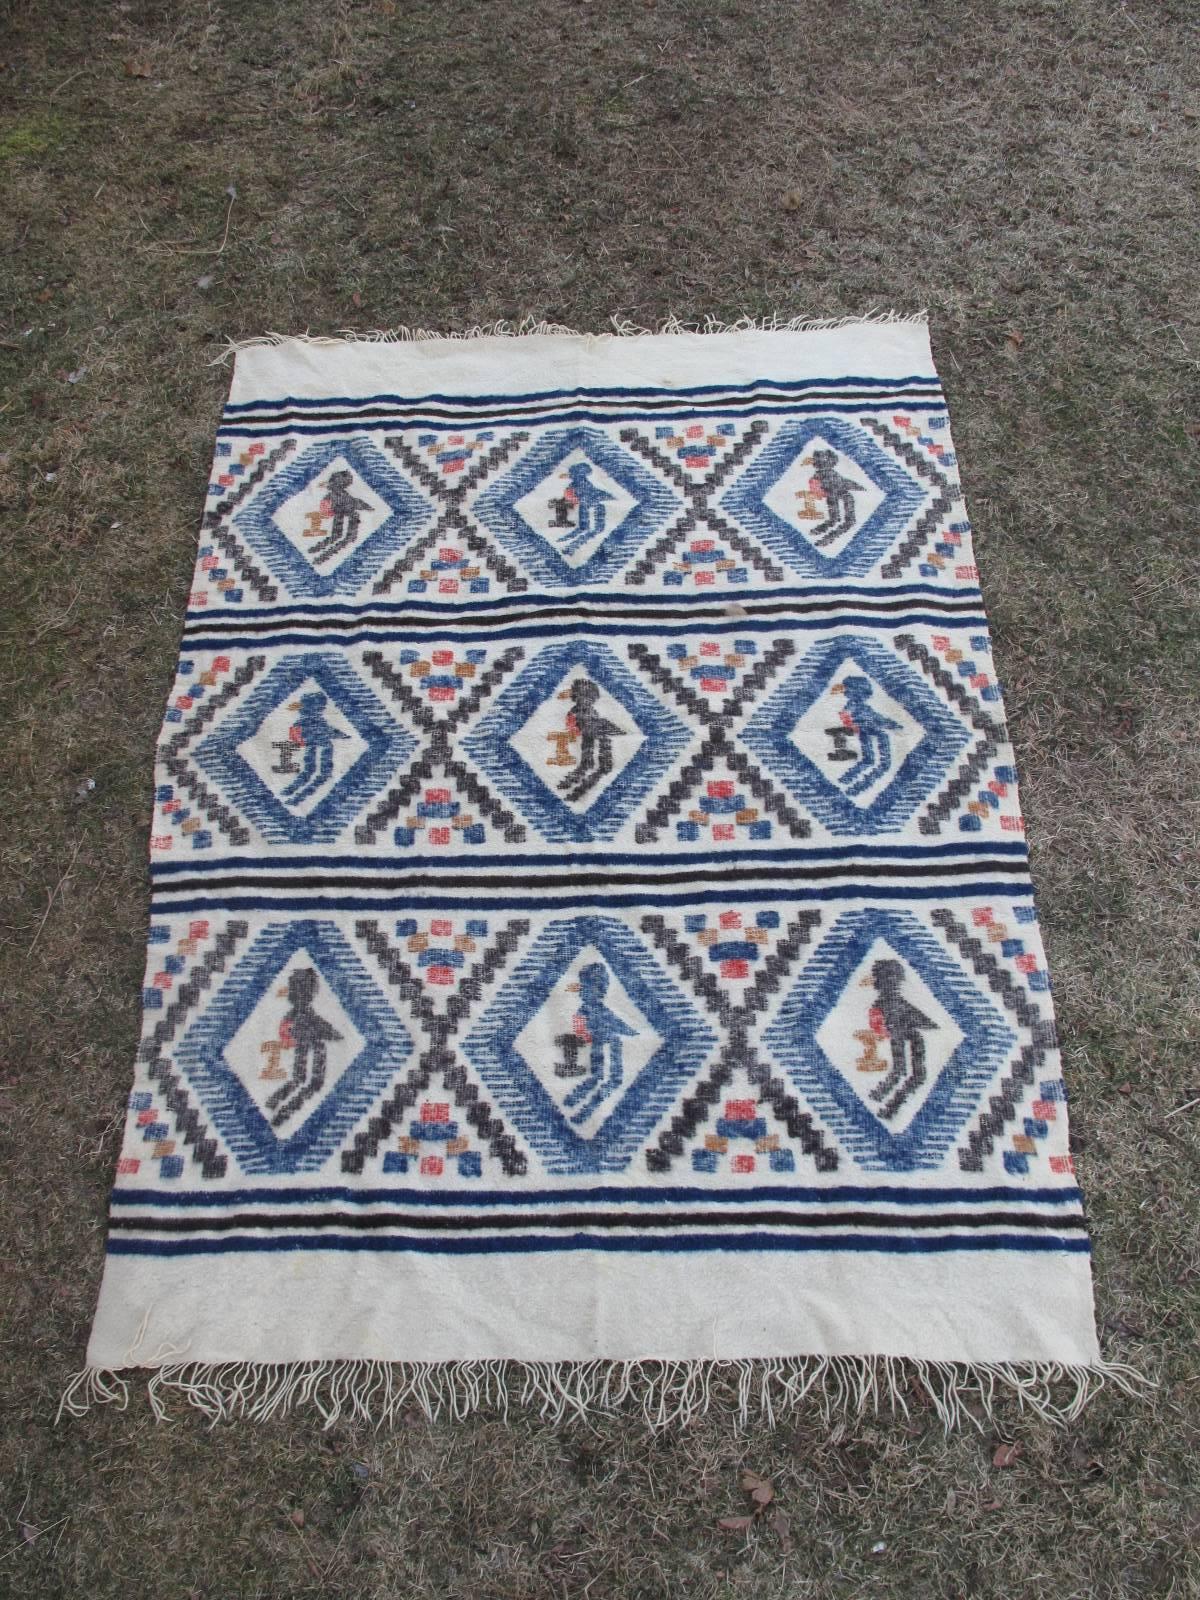 Handwoven wool throw. Five color pattern with perched bird motif. Unique geometric design. Possibly from Guatamala.